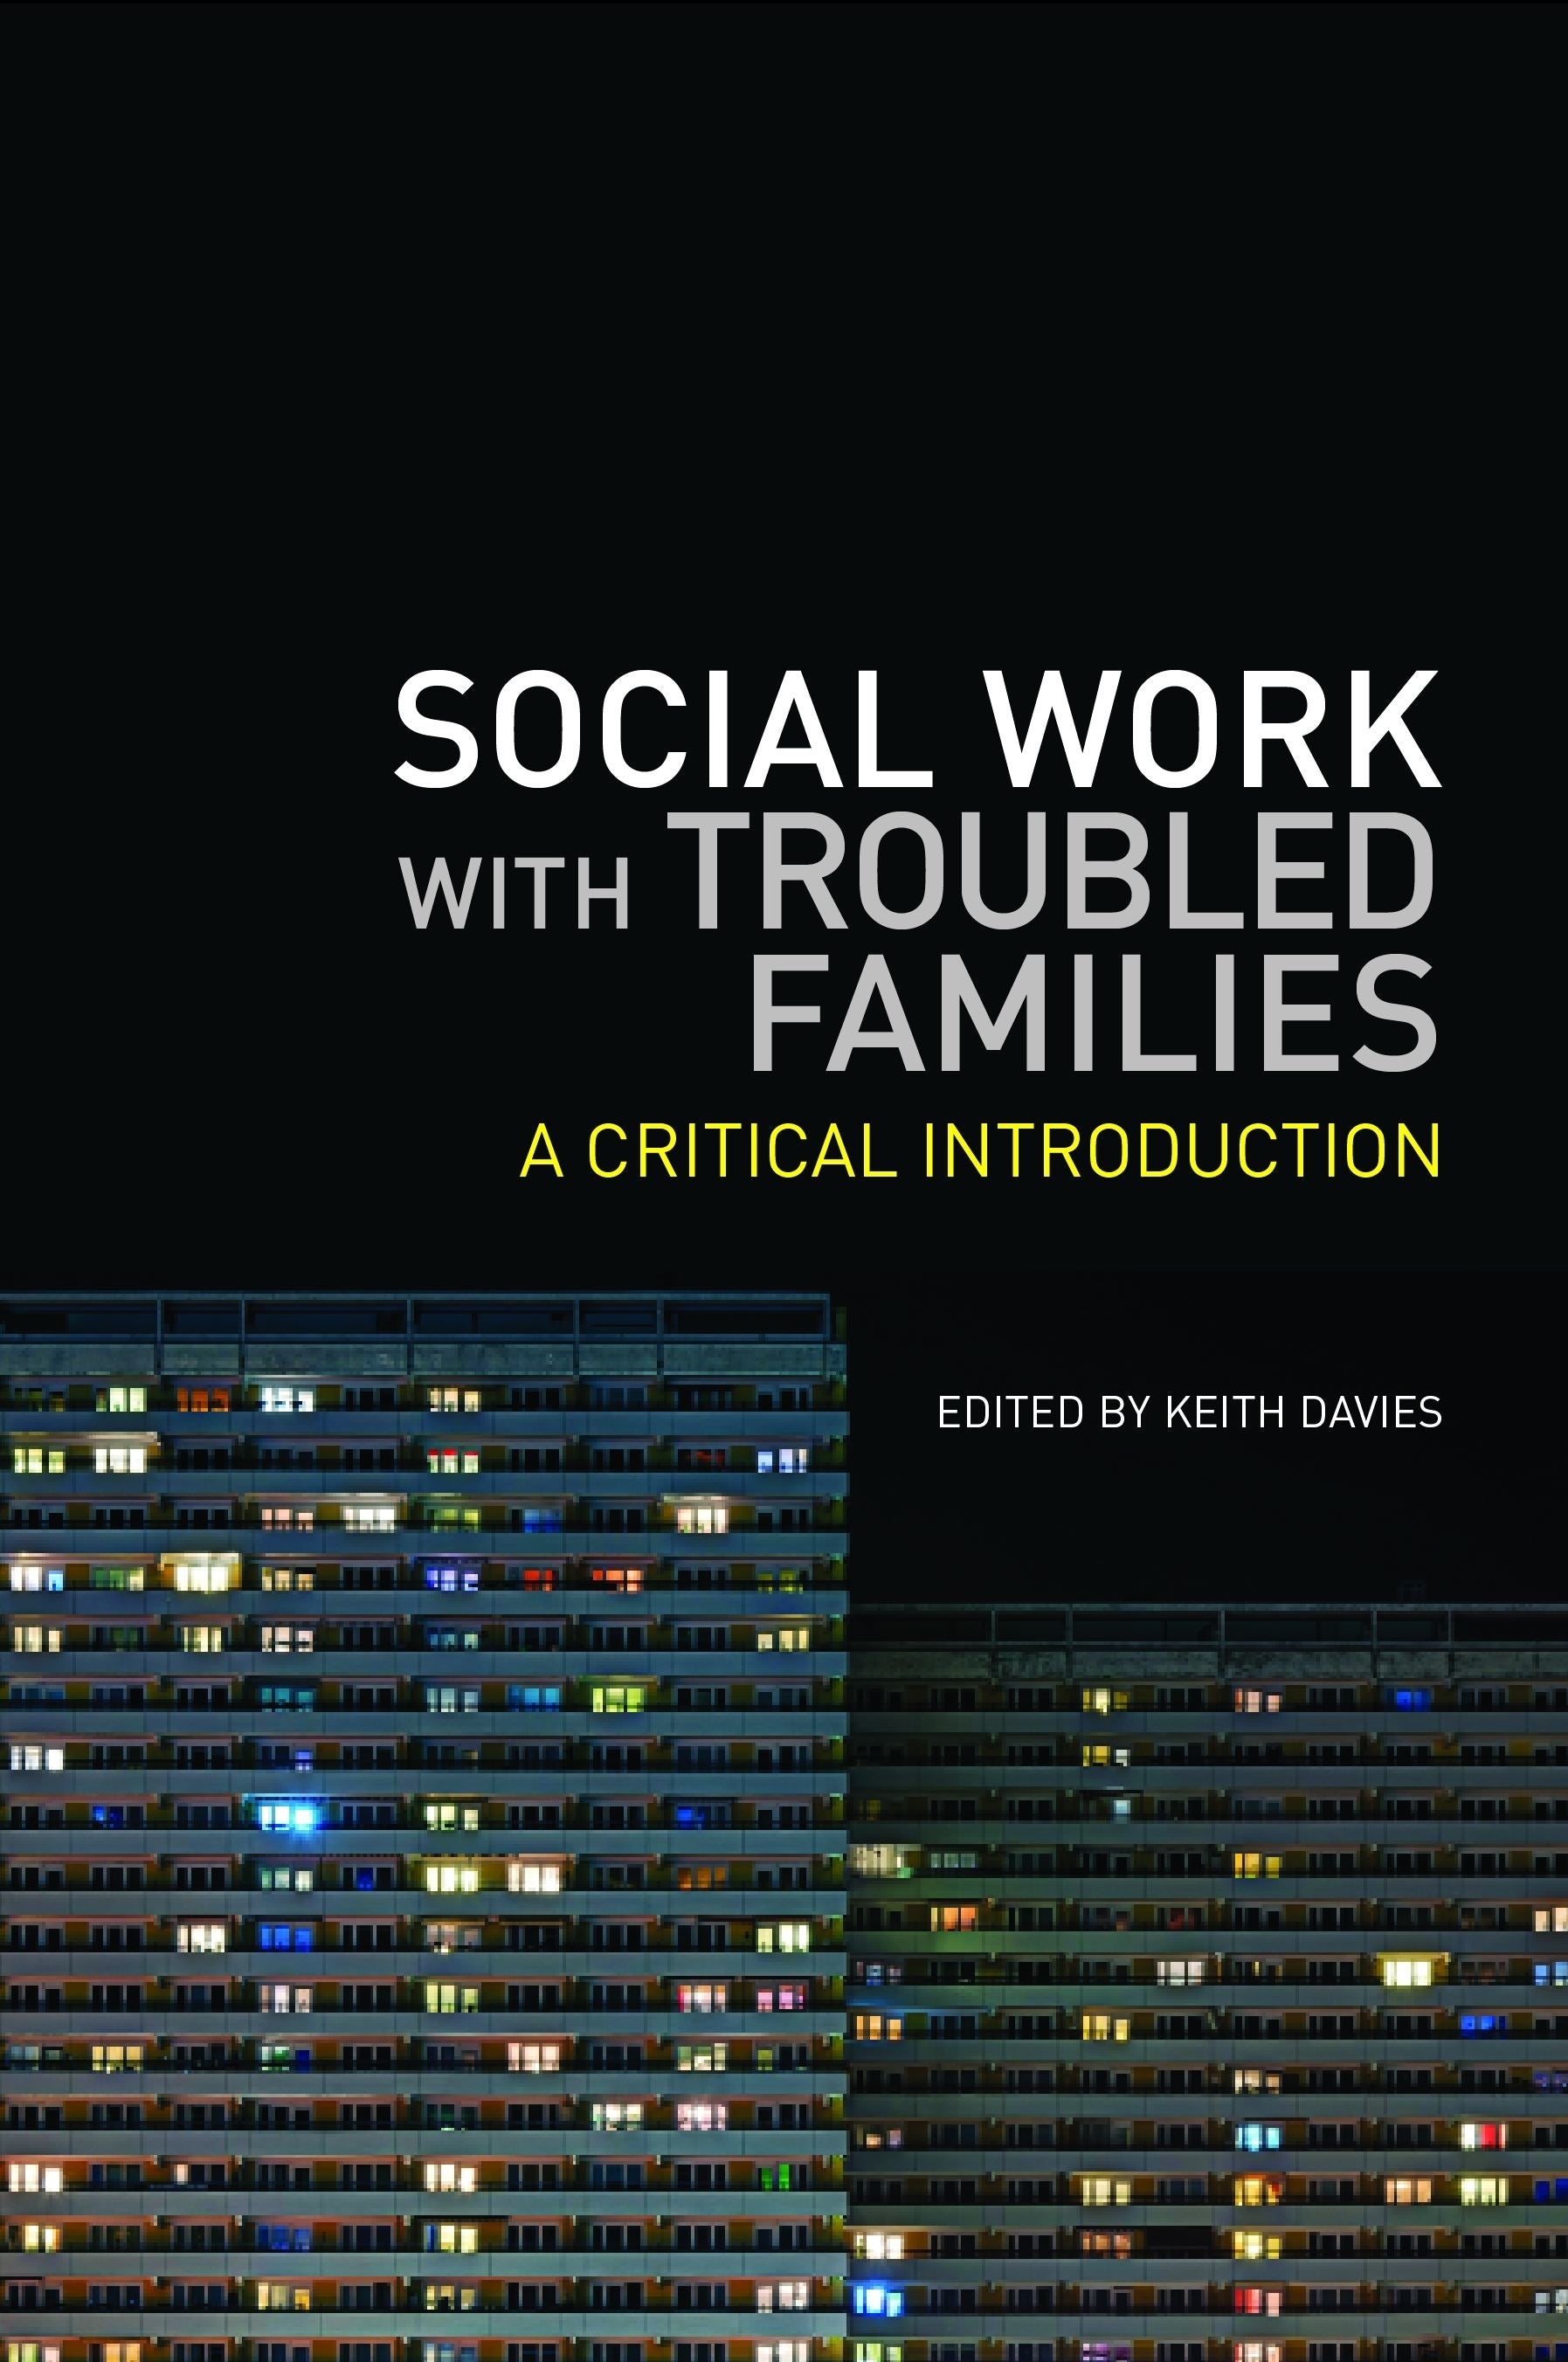 Social Work with Troubled Families by No Author Listed, Keith Davies